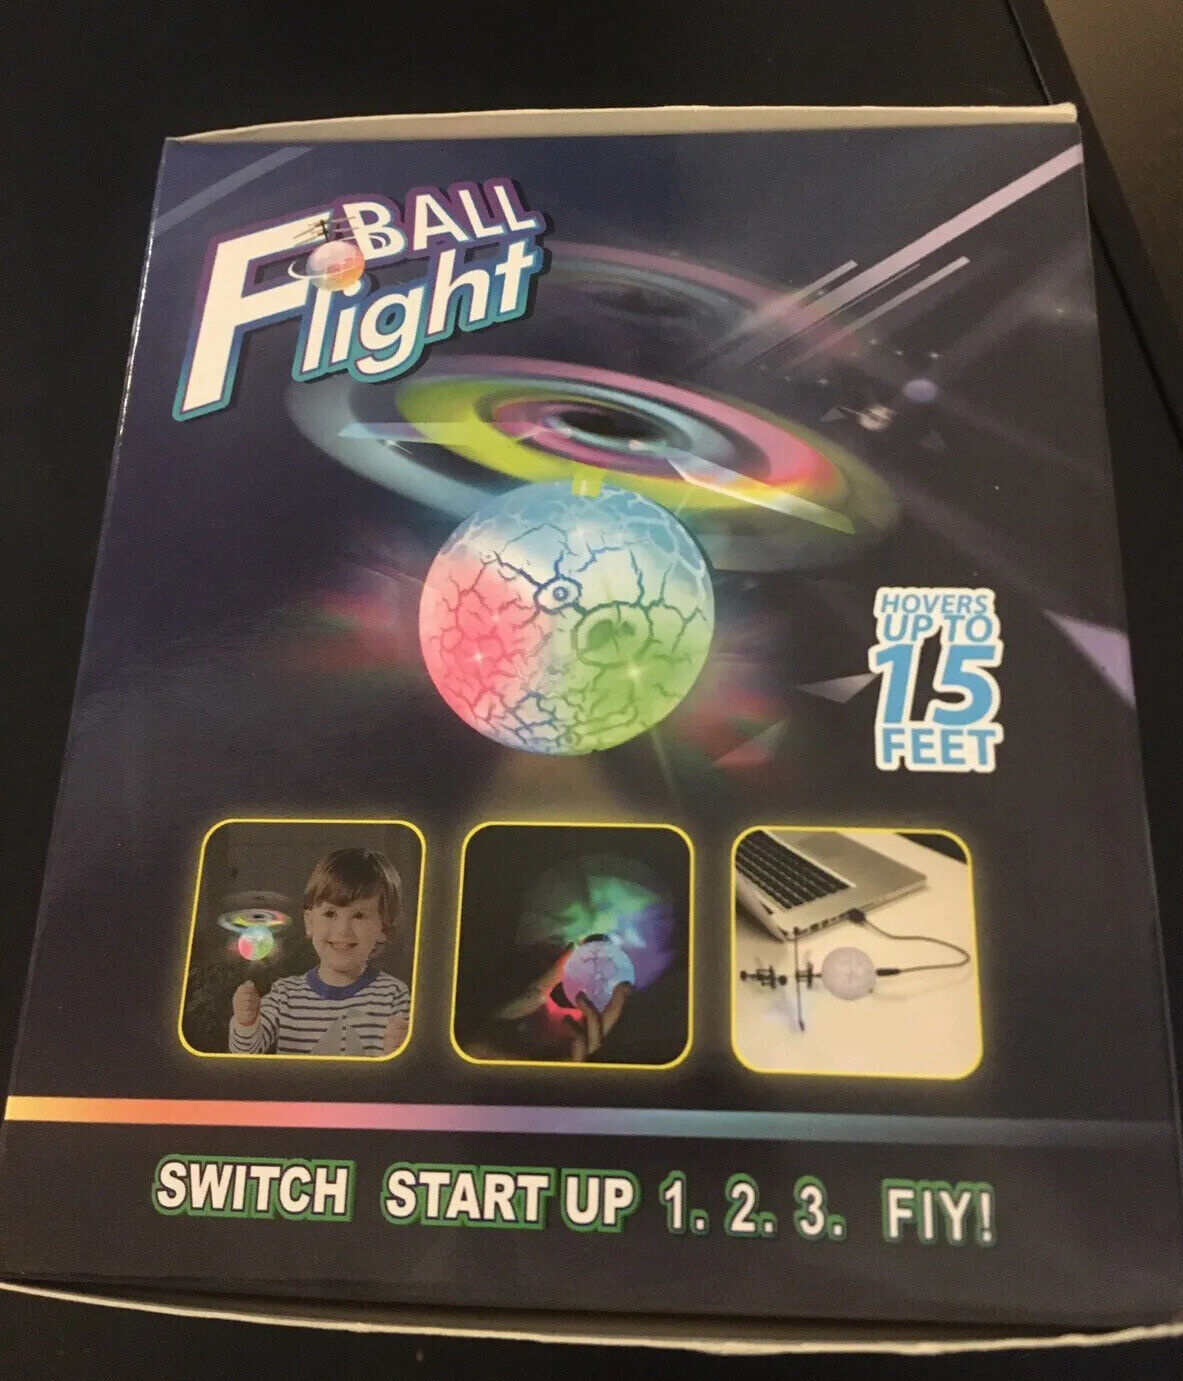 Yezia Ball Flight Control w/ Palm Or Foot  Bright LED’s USB Rechargeable New Yezia Does not apply - фотография #8